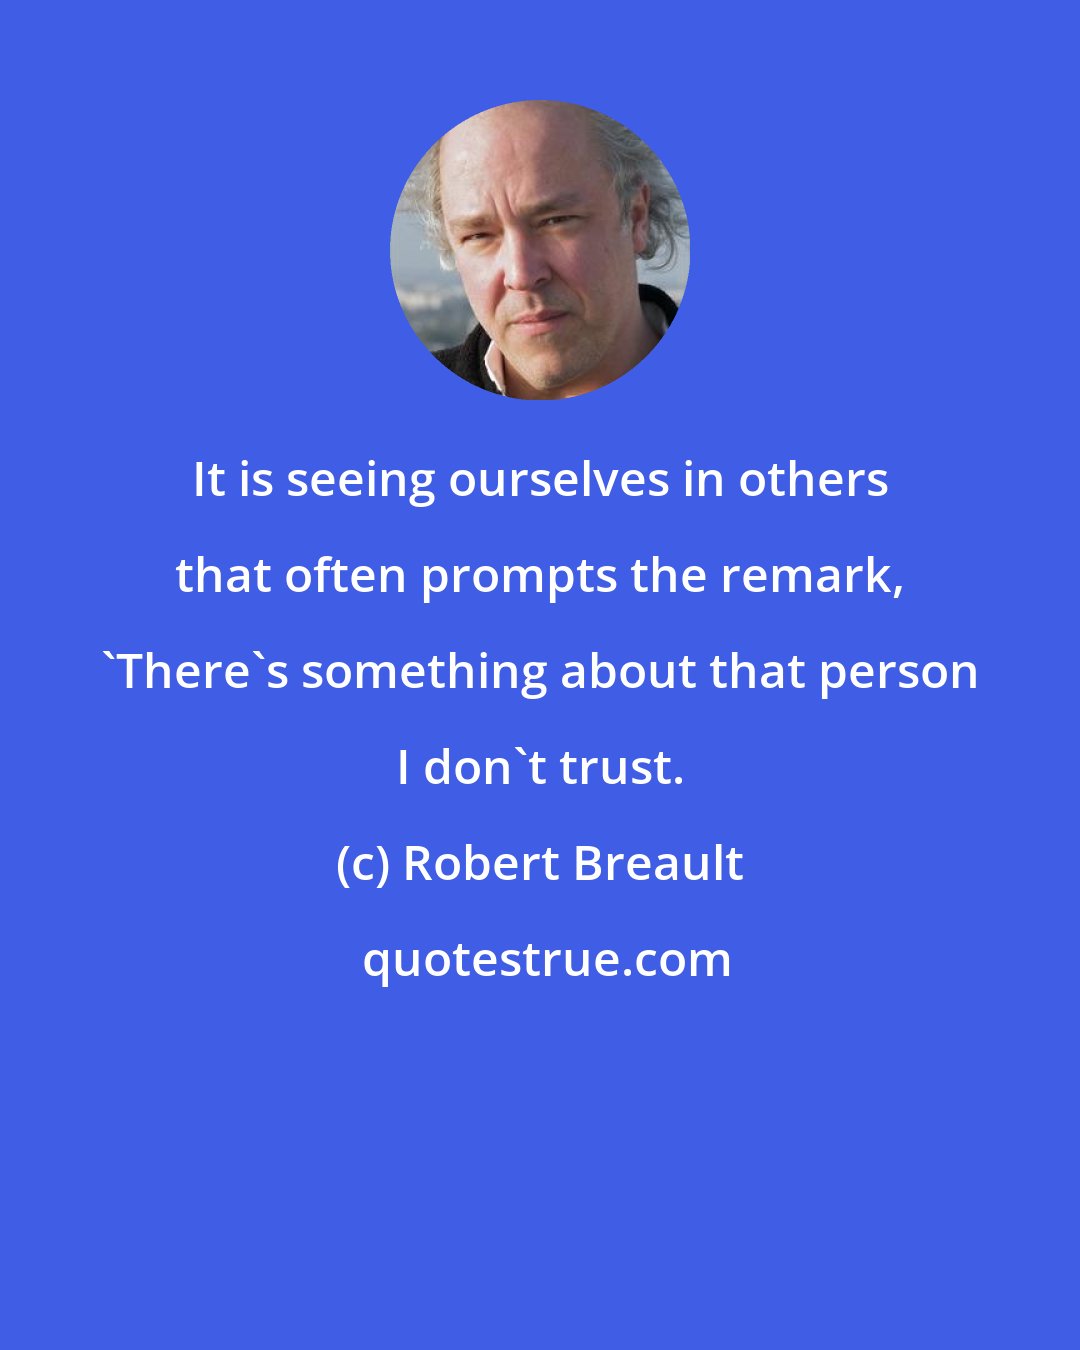 Robert Breault: It is seeing ourselves in others that often prompts the remark, 'There's something about that person I don't trust.